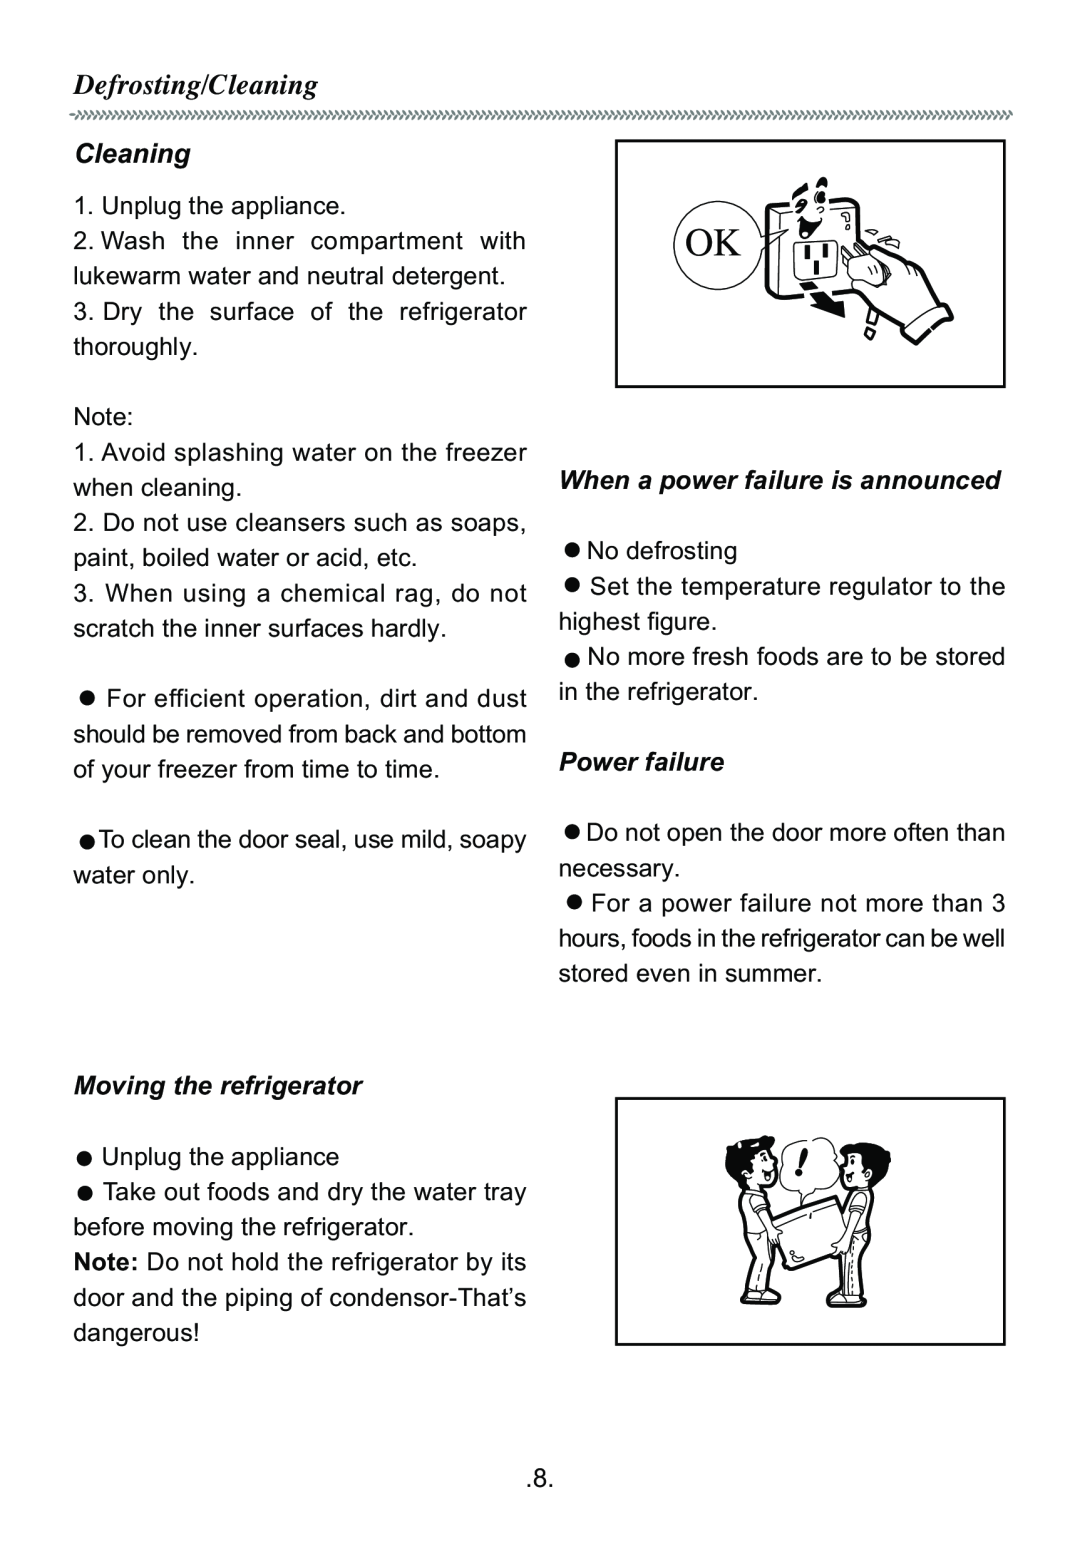 Haier C60 manual When a power failure is announced, Power failure, Moving the refrigerator, Defrosting/Cleaning 